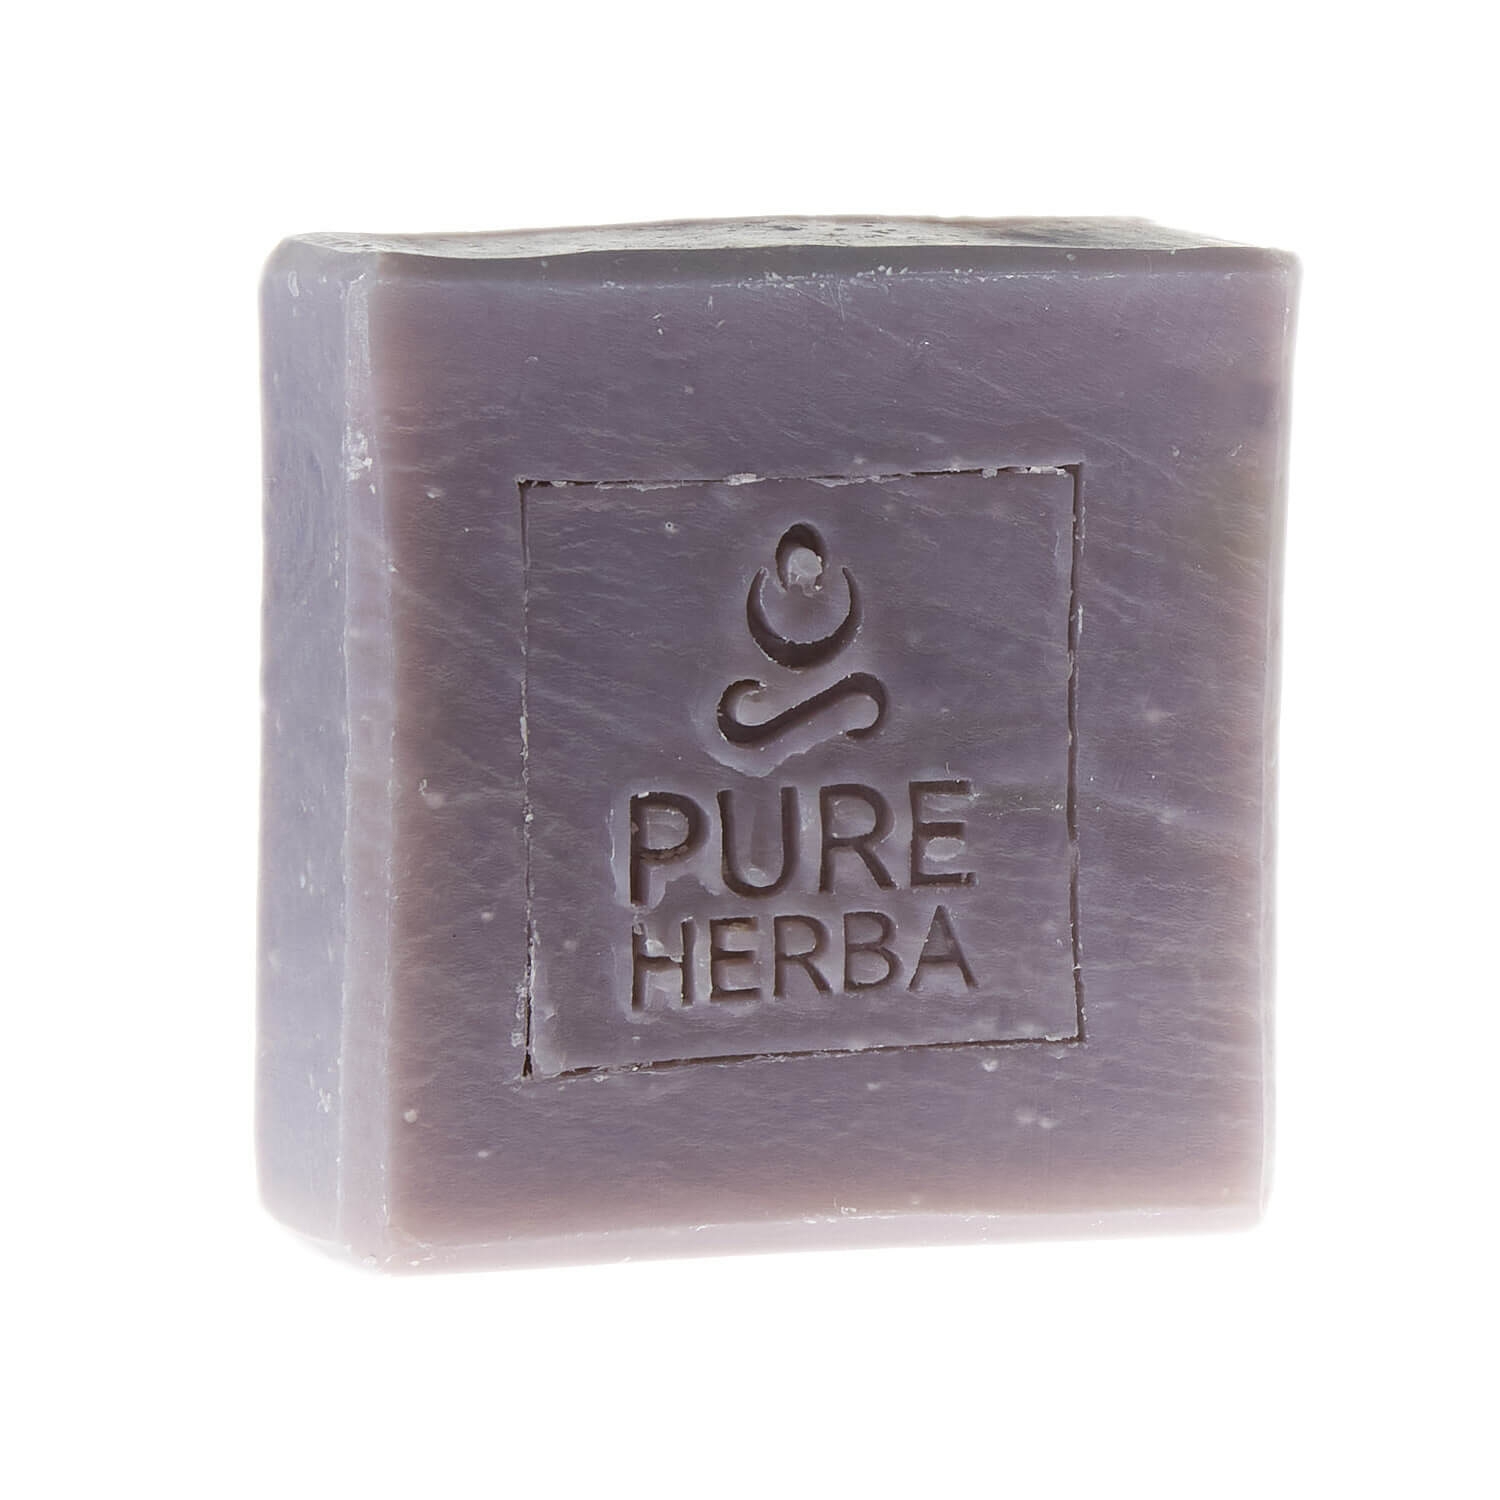 Lavender Soap – 100% Natural & Ethical – No Harsh Chemicals – Pure Herba